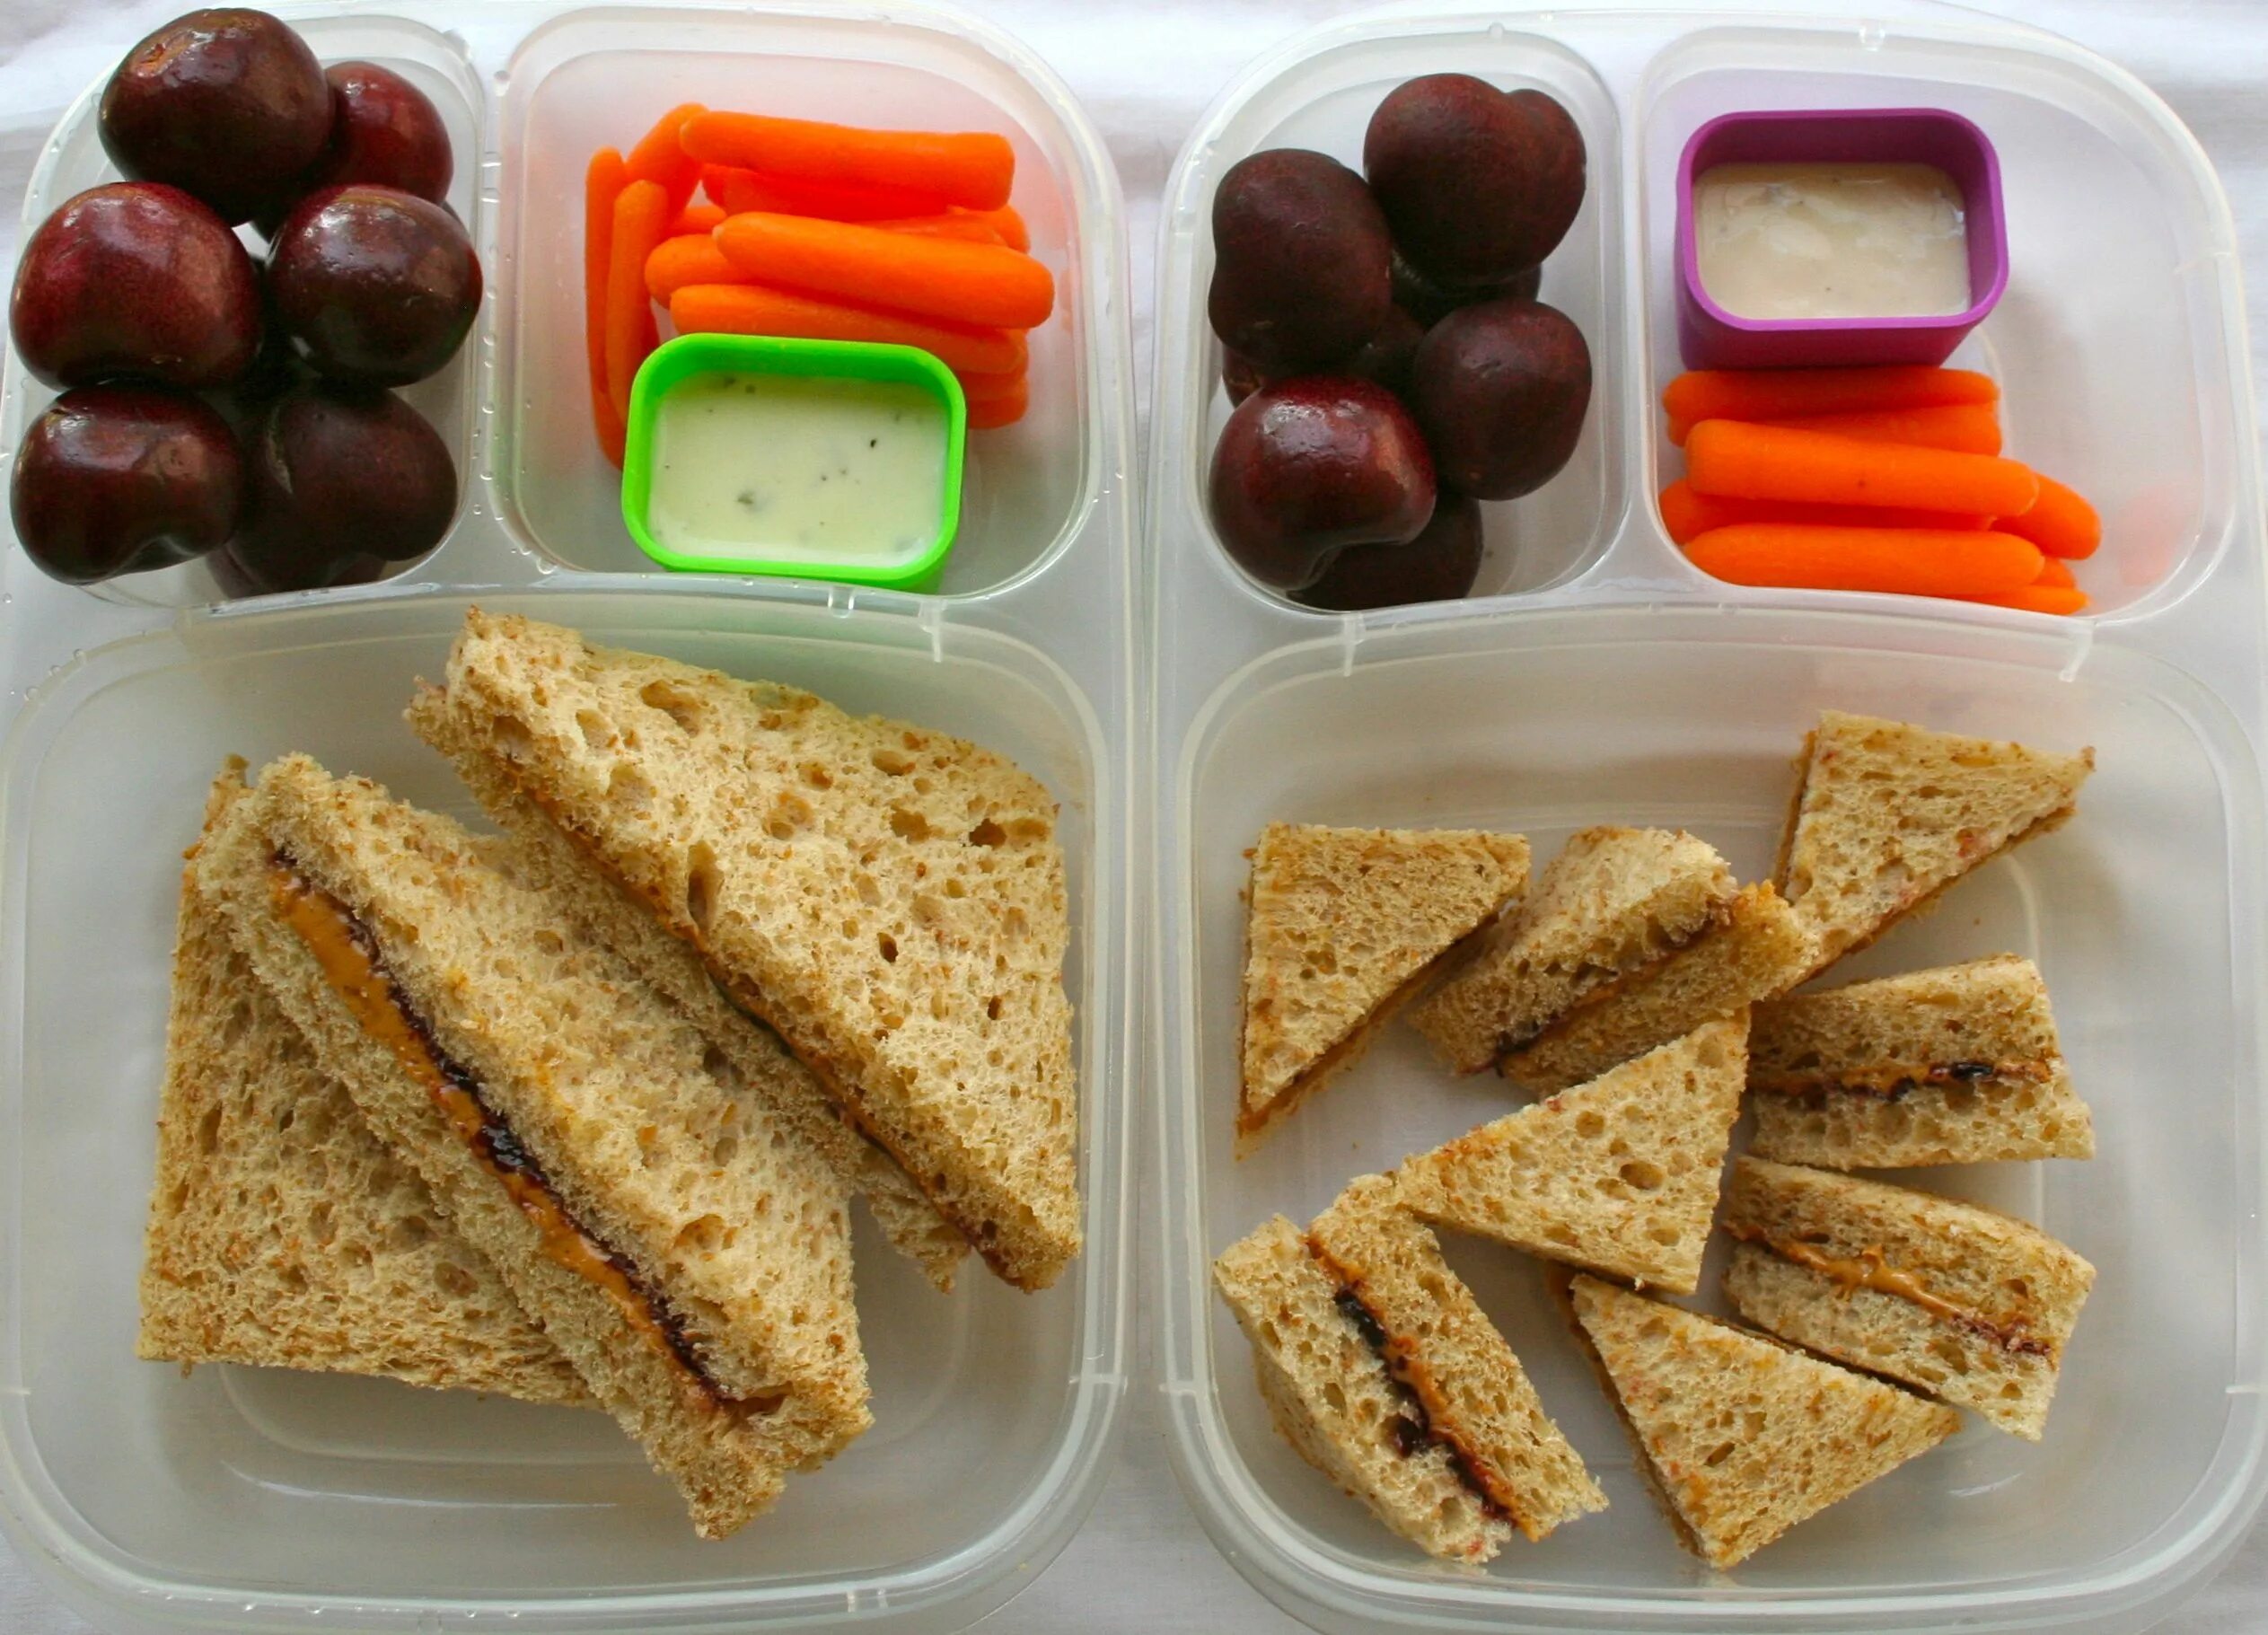 Snack for School. School lunch. Snack for lunch. Сбор ланч школа.